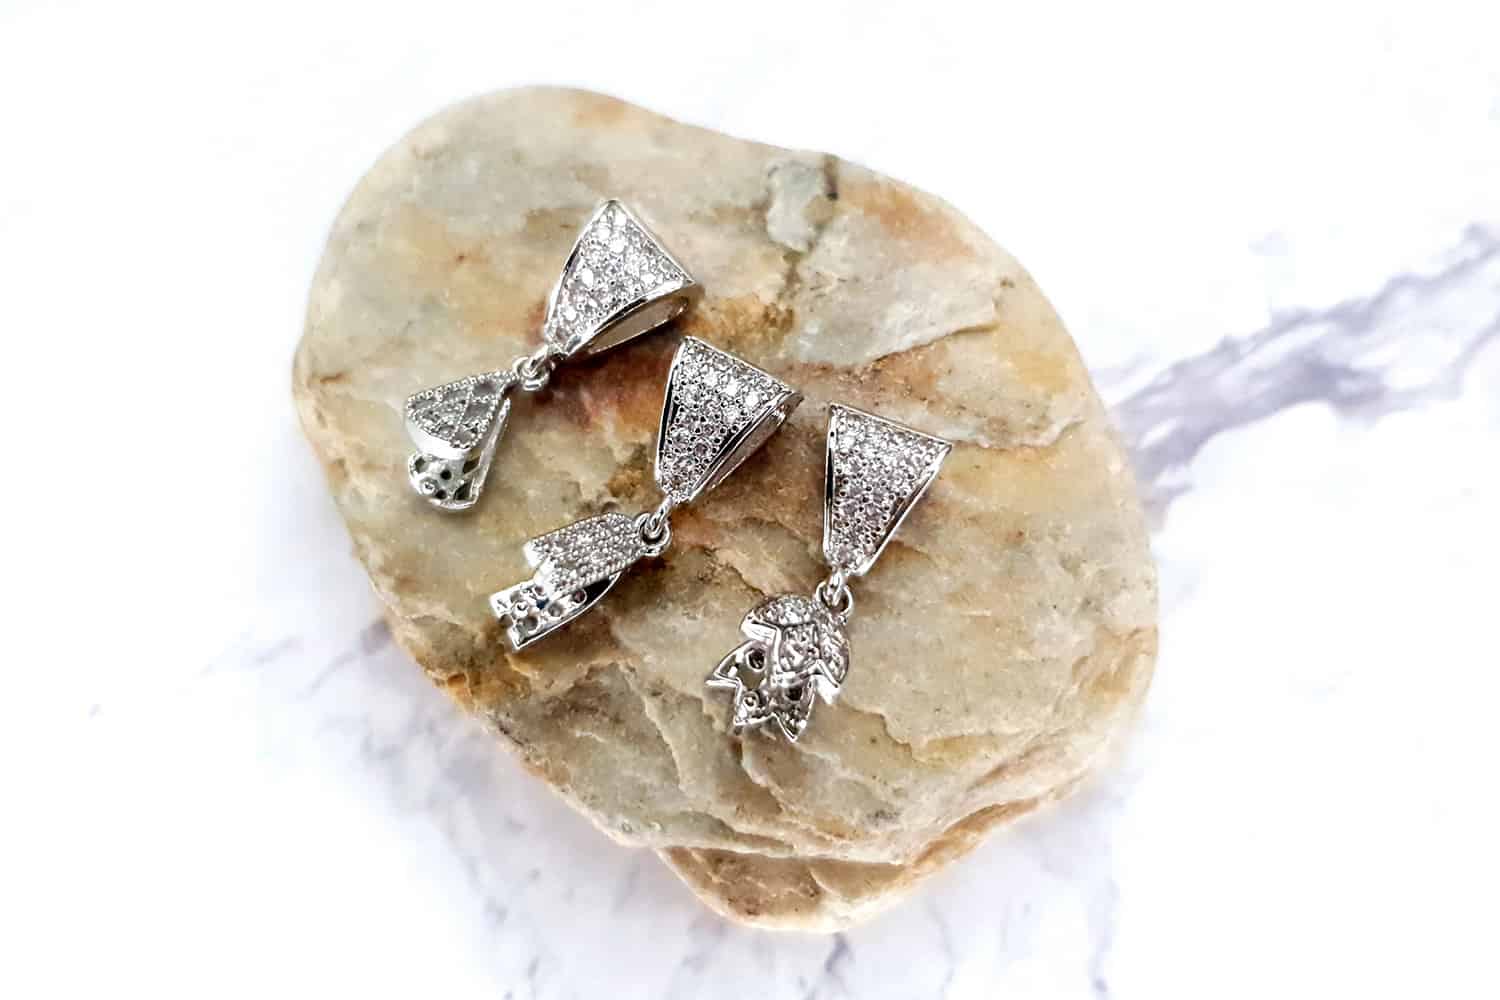 3 high quality silver crystals pendant pinch bail (25361)